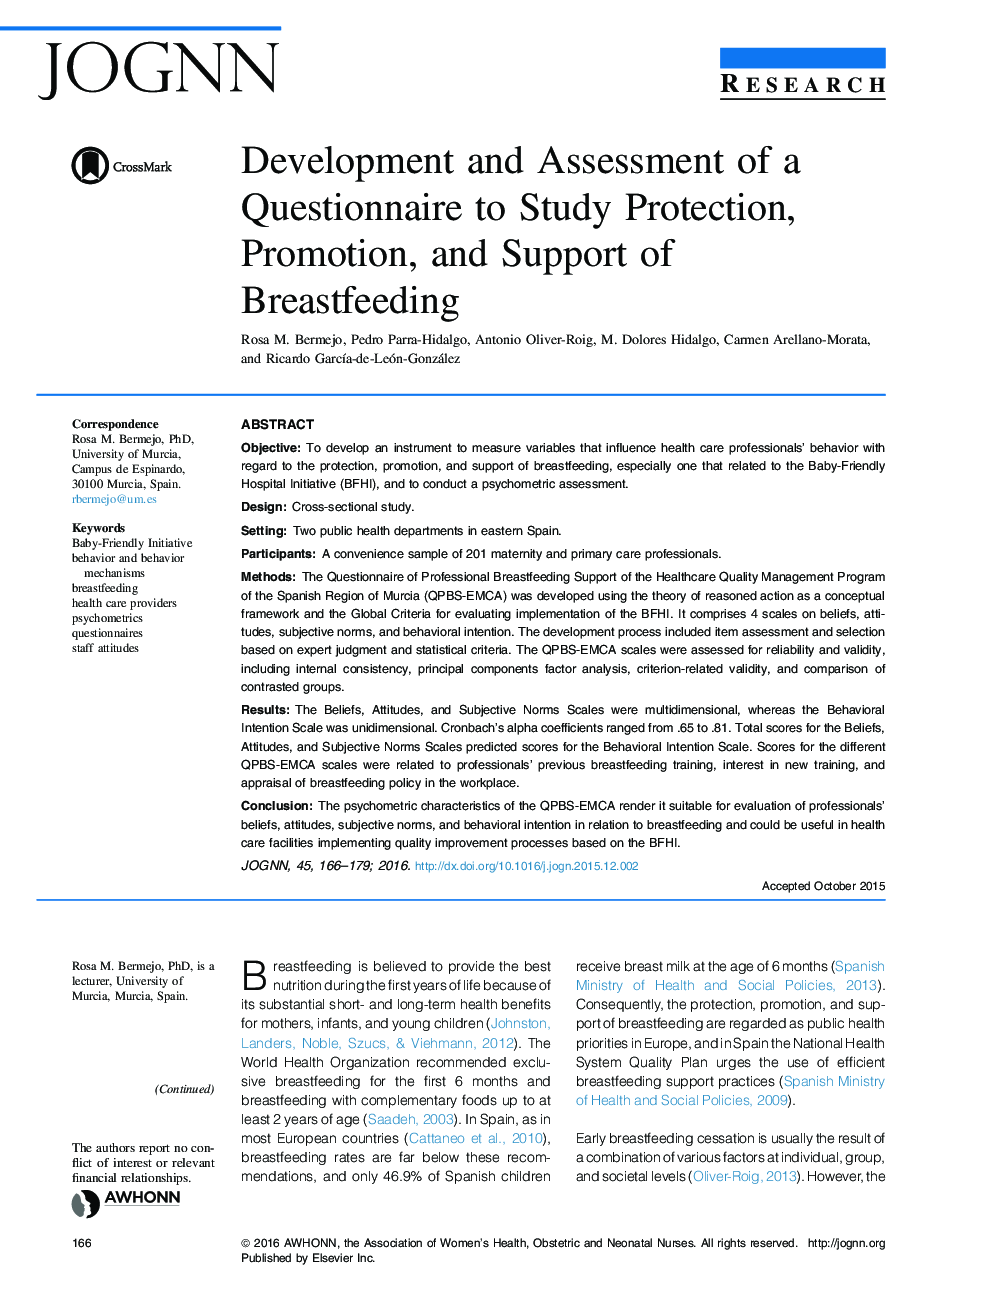 Development and Assessment of a Questionnaire to Study Protection, Promotion, and Support of Breastfeeding